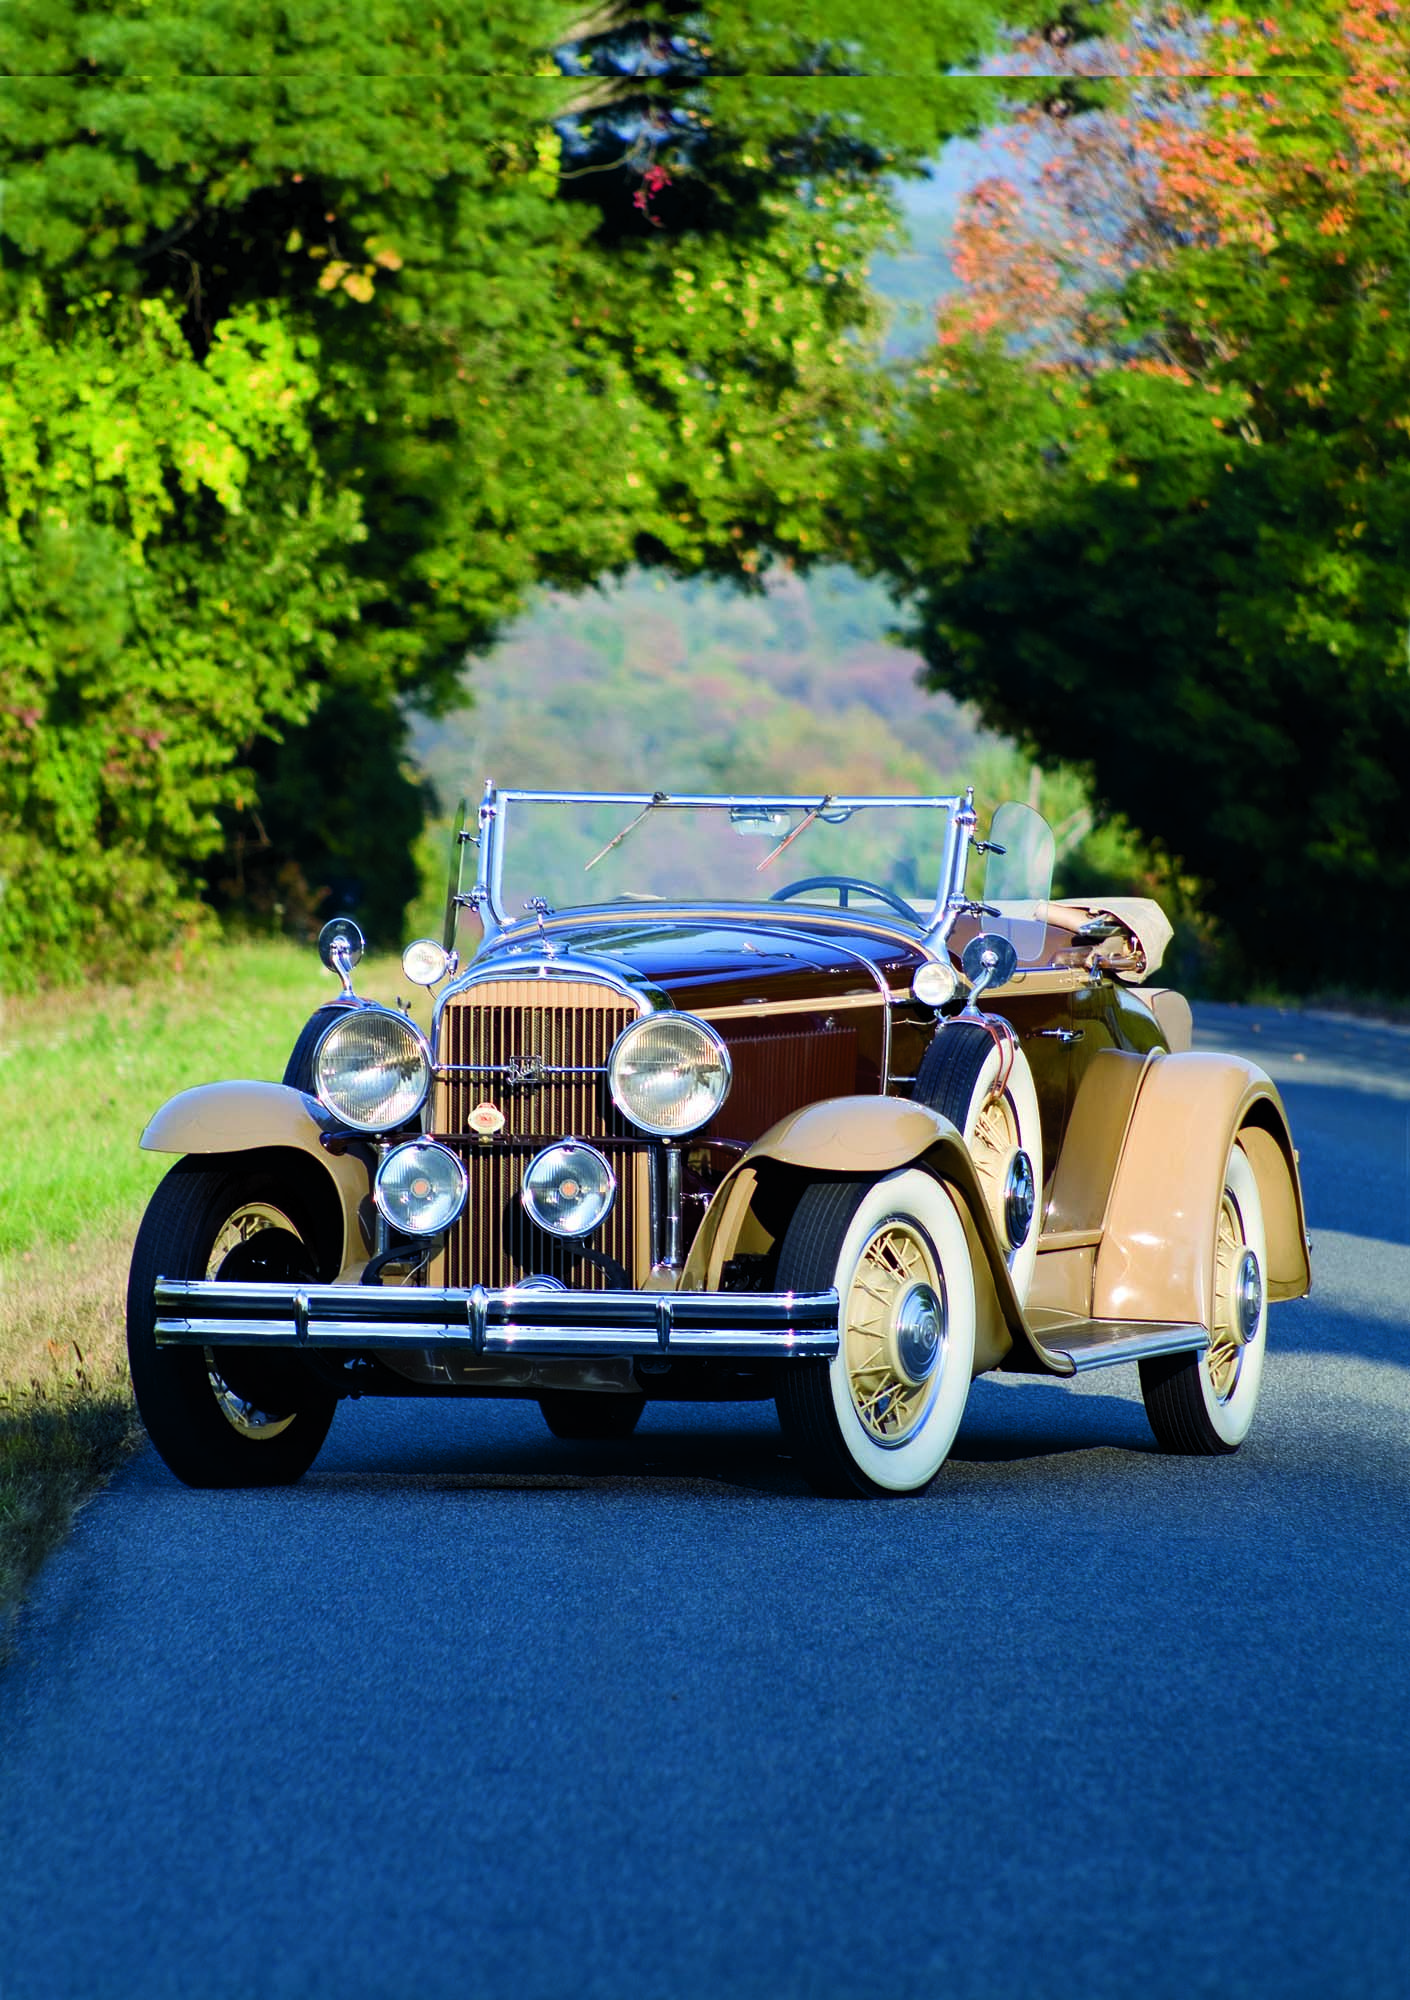 The 1931 Buick Series 60 Was The First Of The Buick Eights